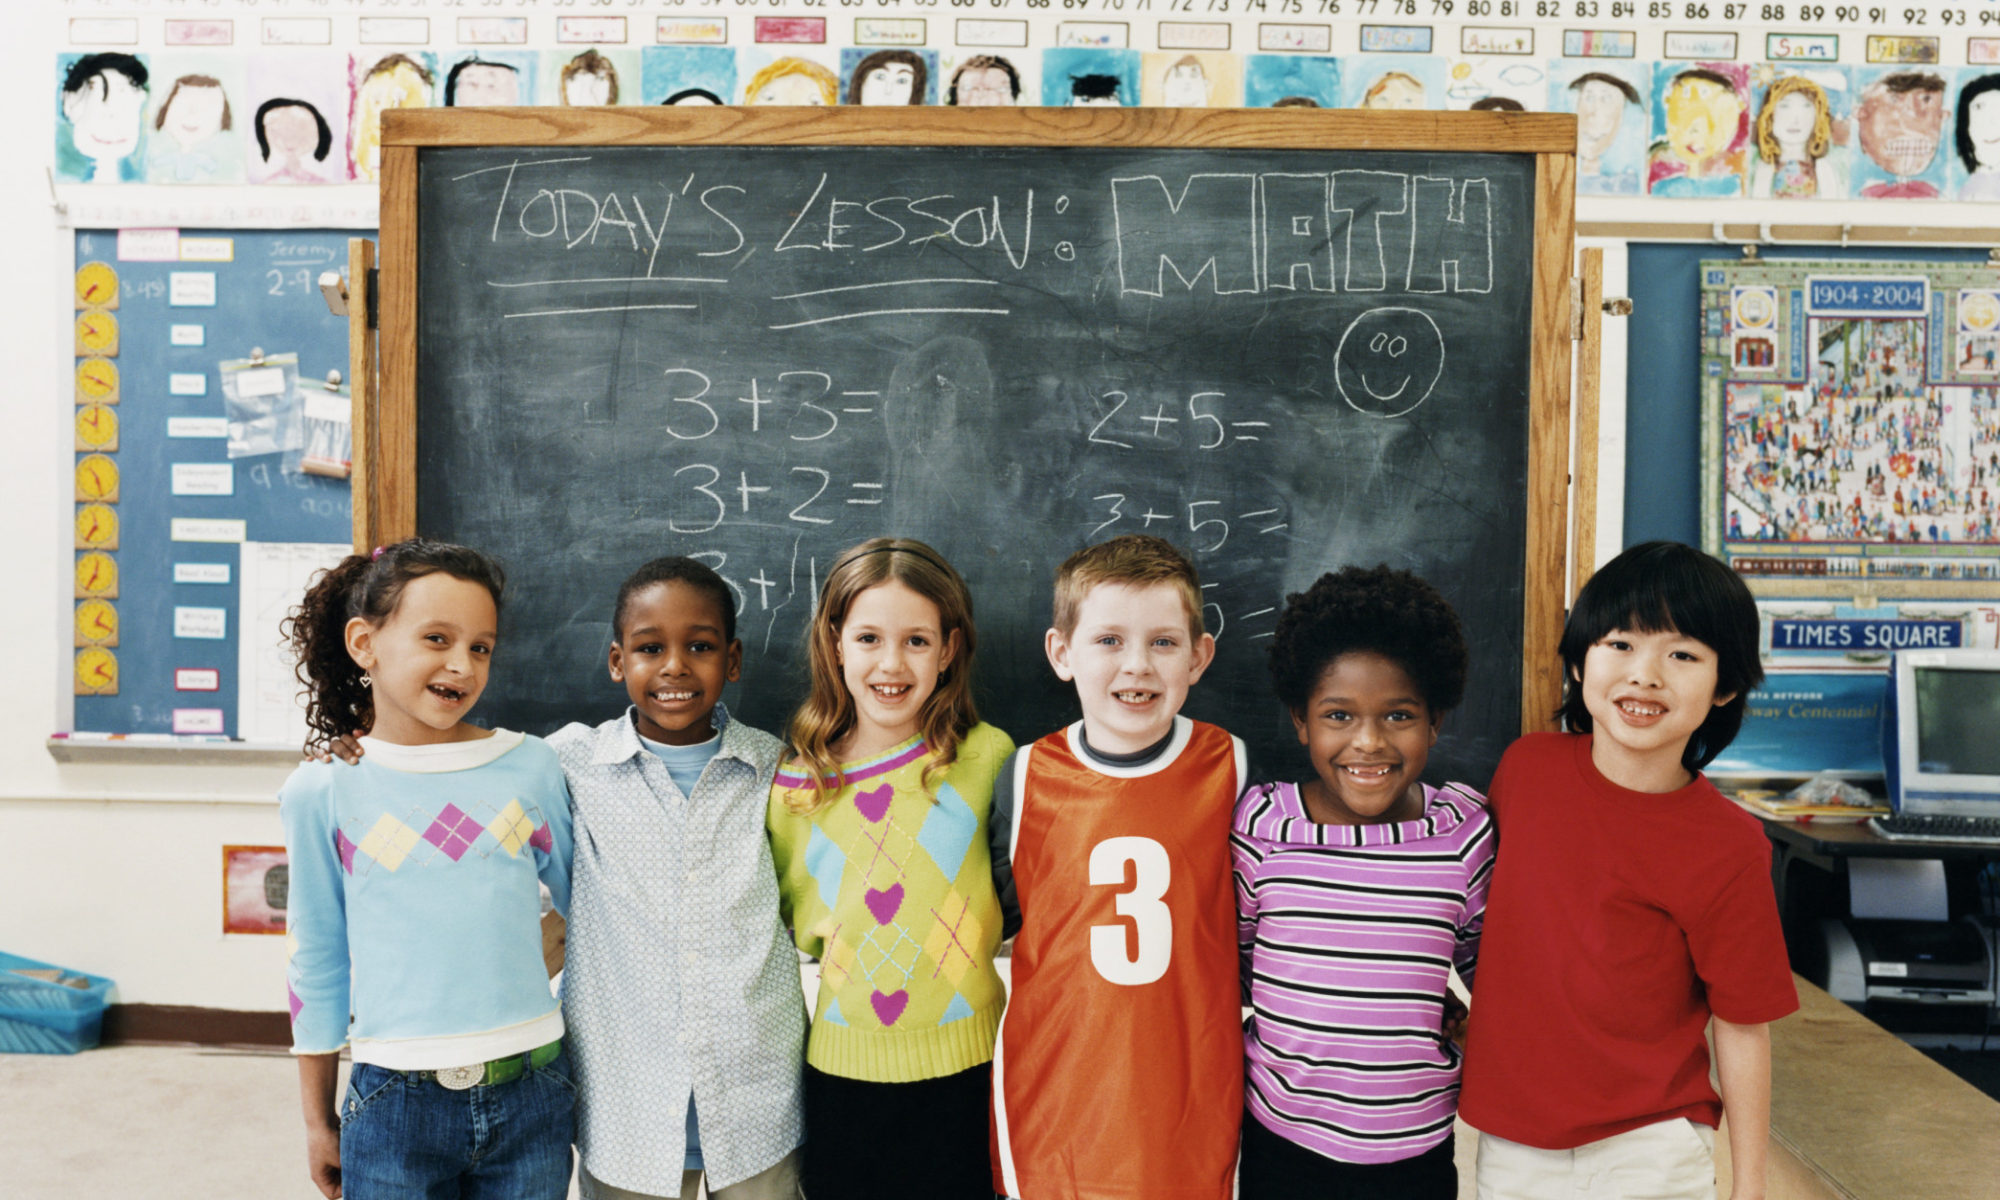 A group of children standing in front of a chalkboard.